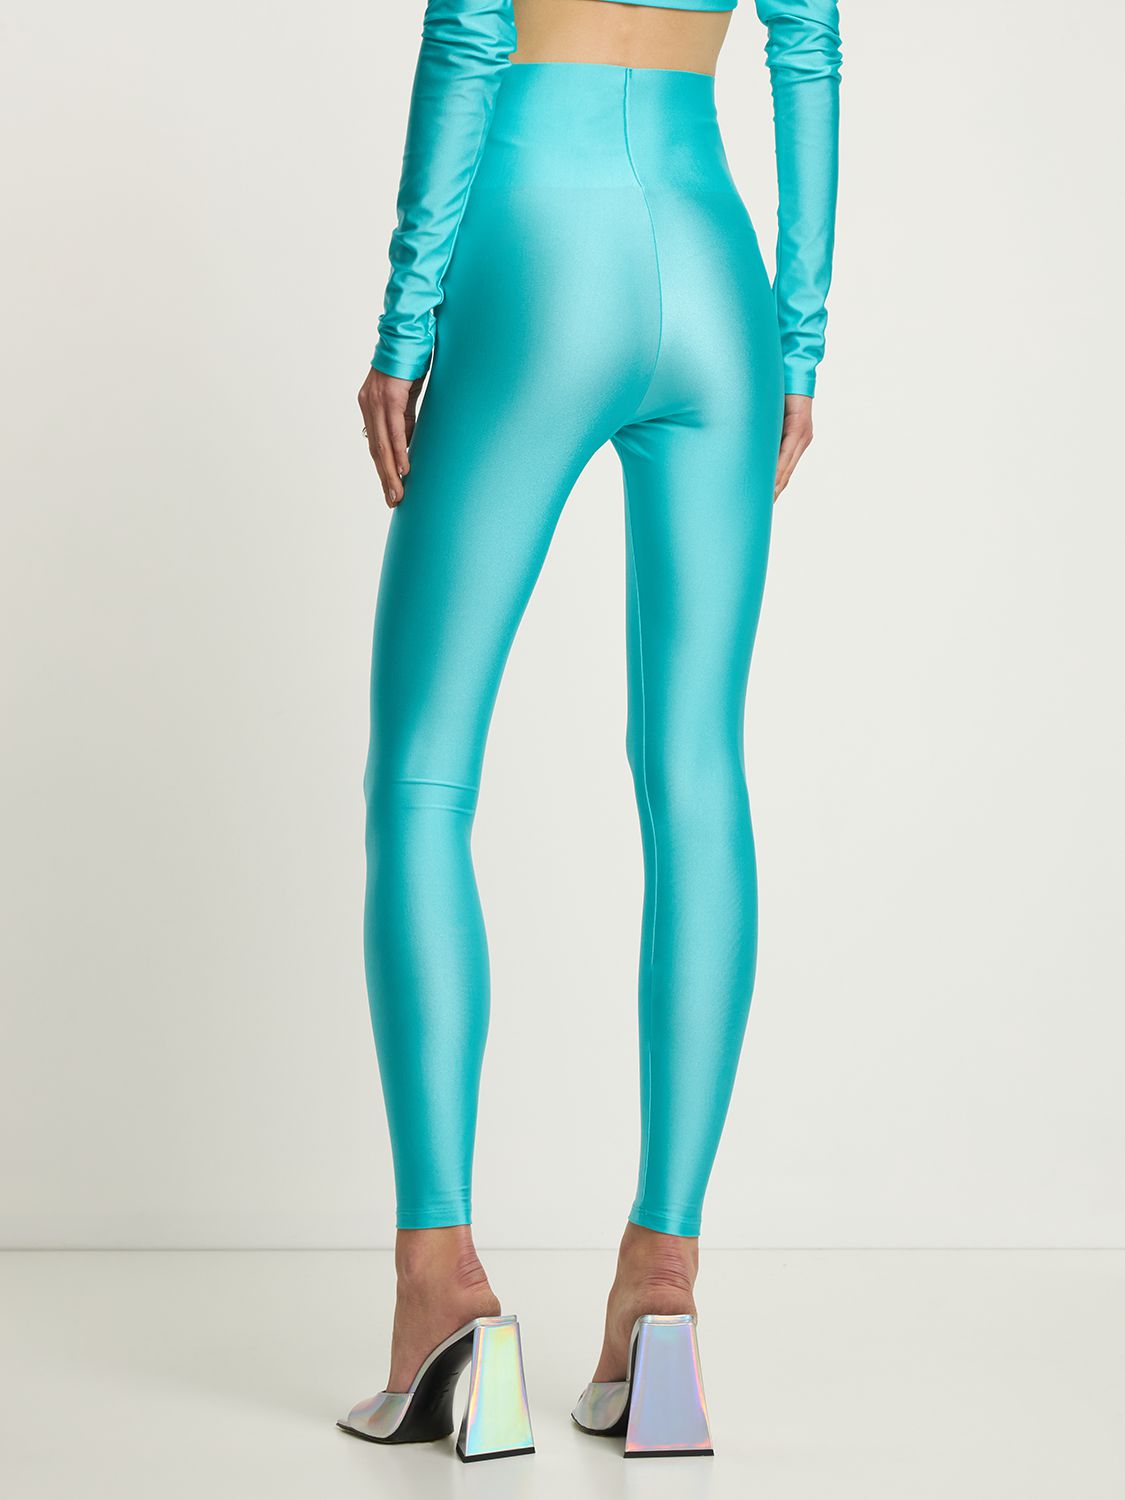 THE ANDAMANE Holly 80's Stretch Jersey Leggings